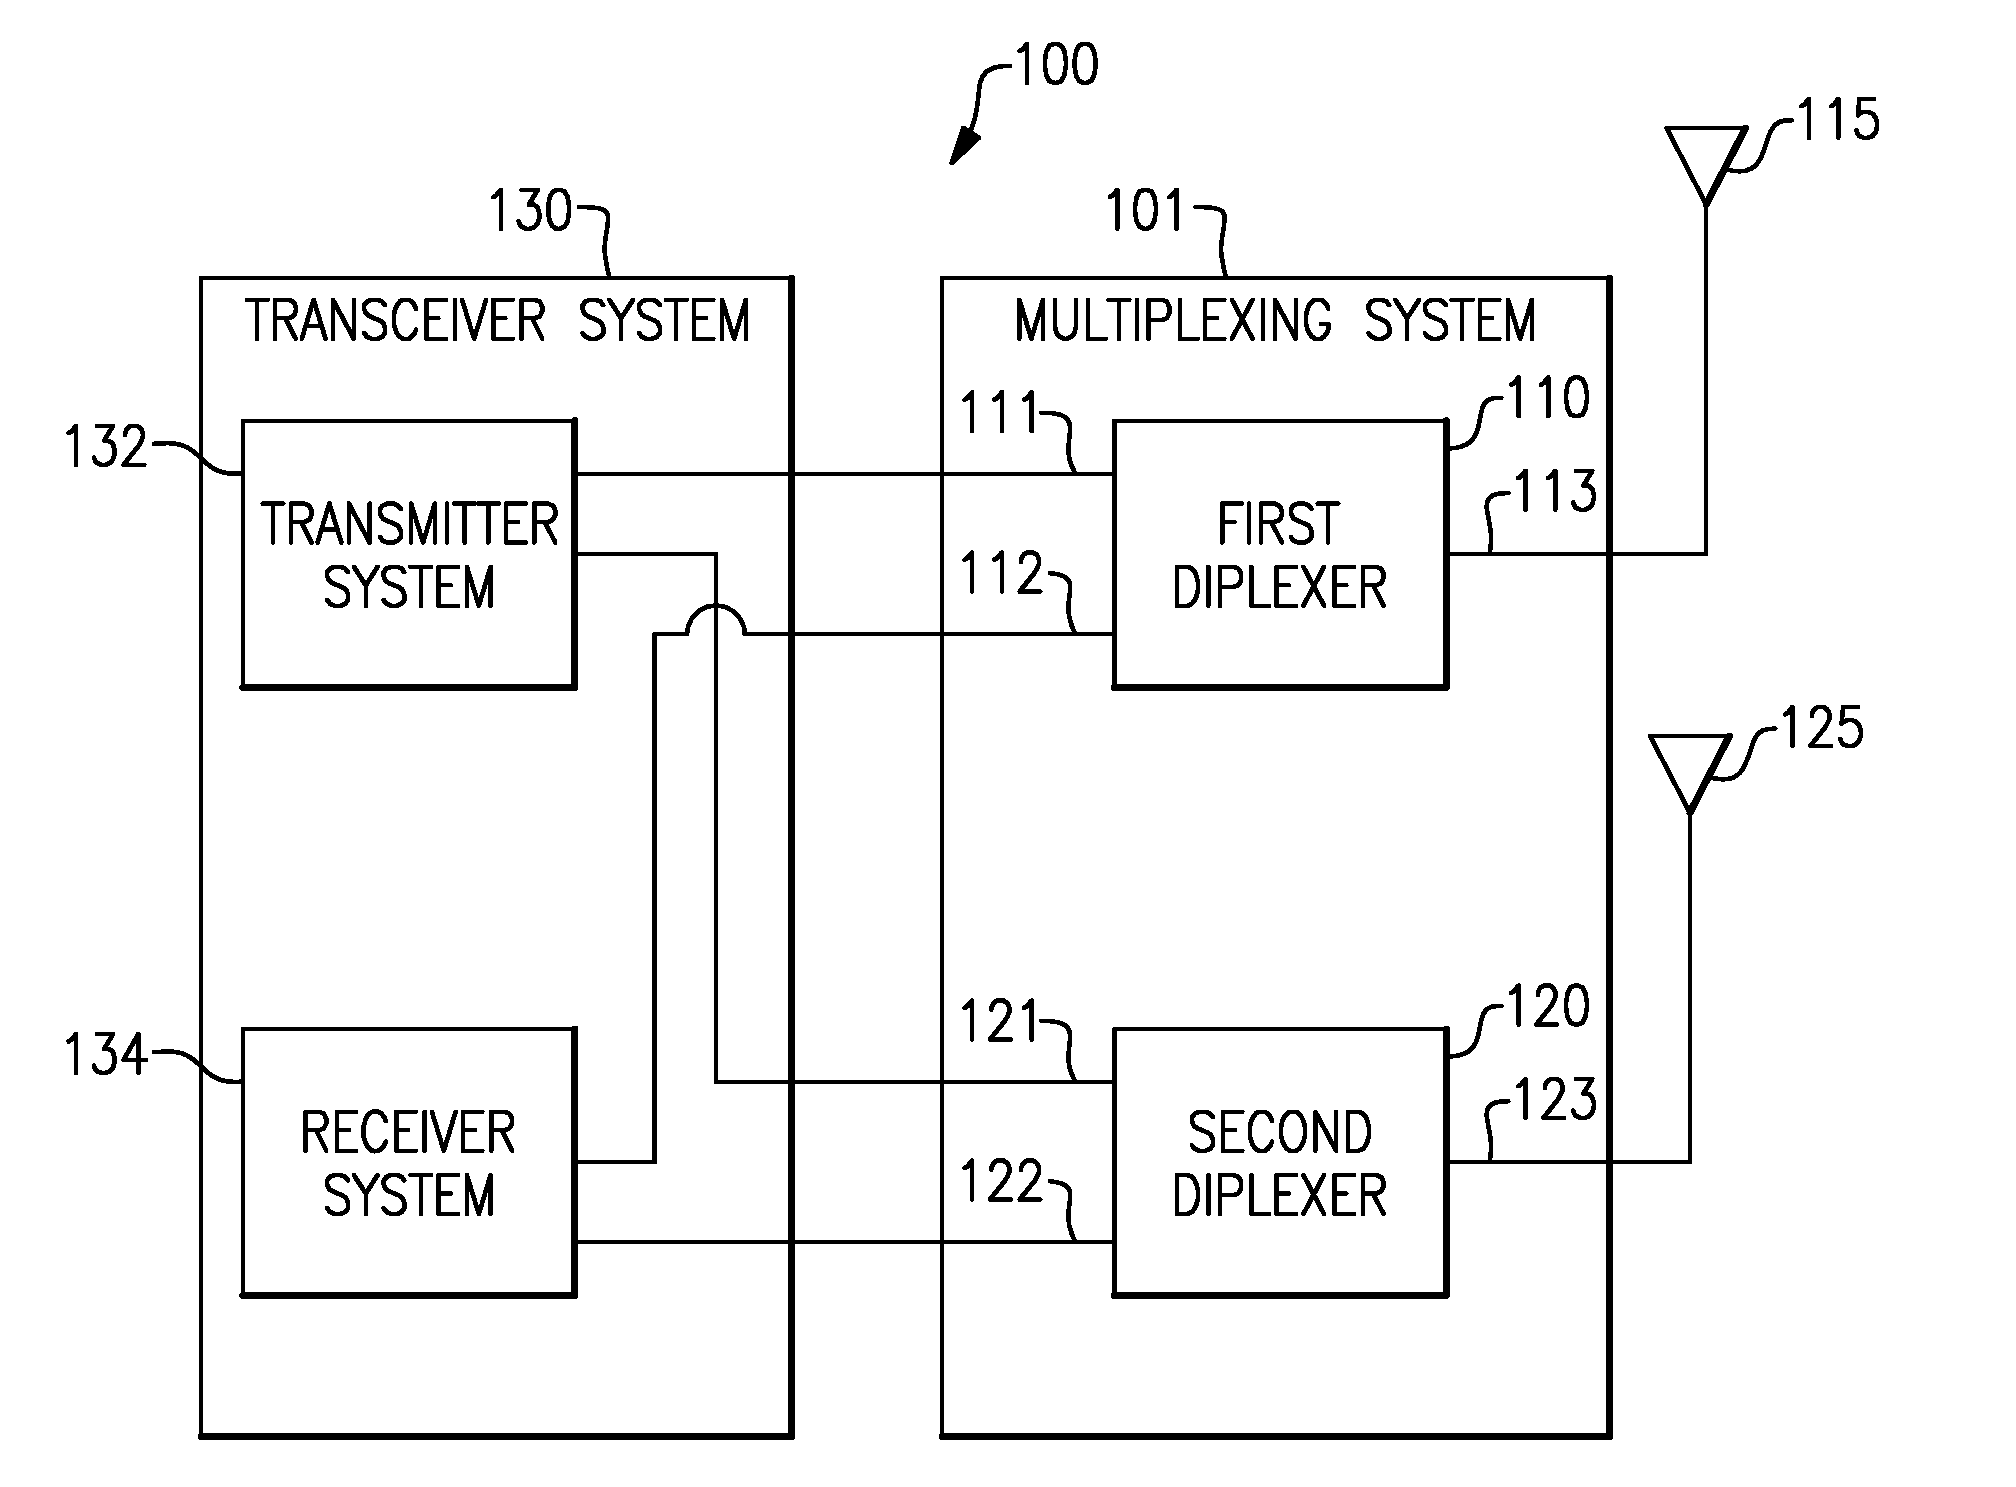 Carrier aggregation using diplexers